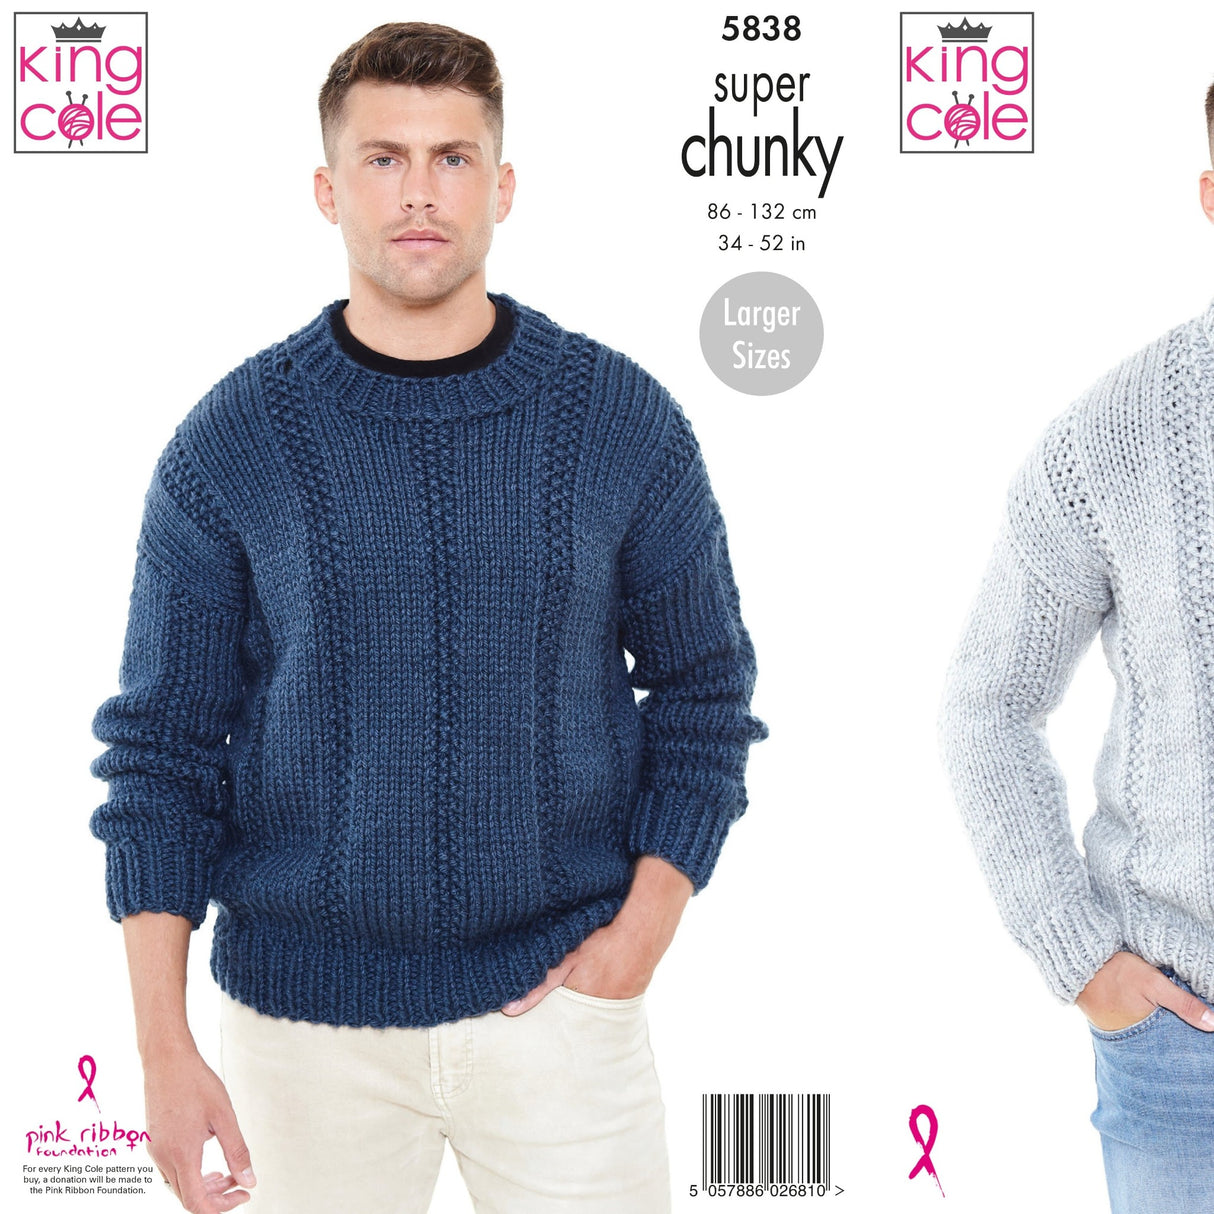 King Cole Patterns King Cole Mens Super Chunky Knitting Pattern 5838